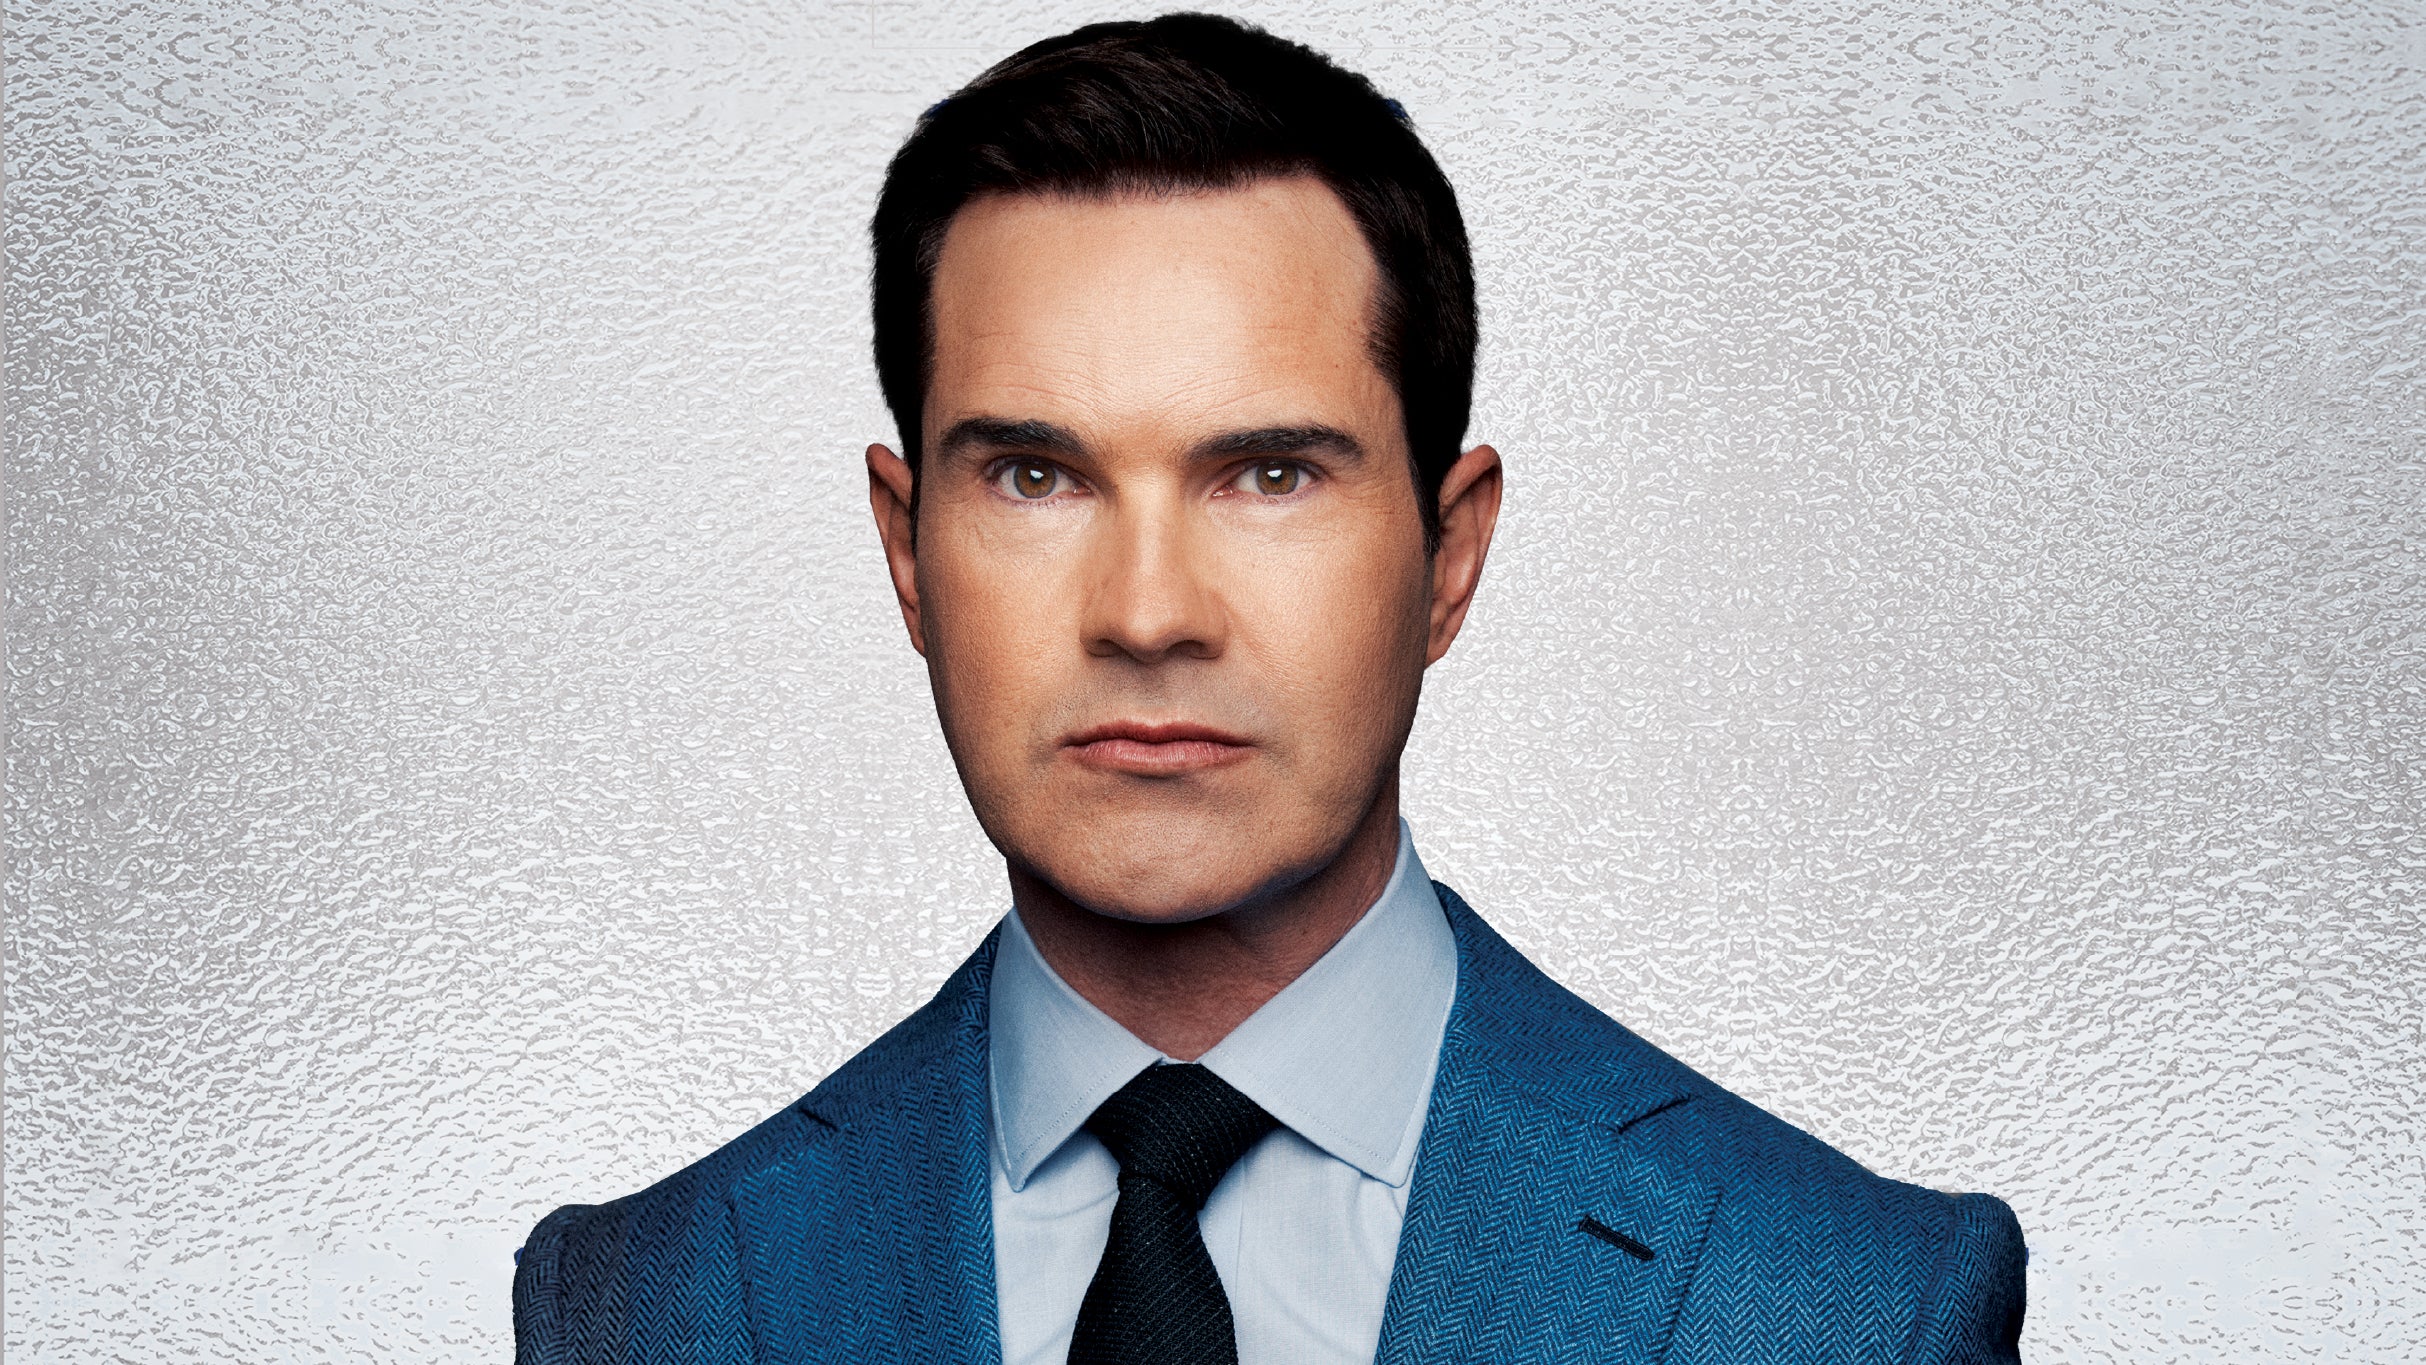 Jimmy Carr: Terribly Funny (16+) in Charleston promo photo for Ticketmaster presale offer code